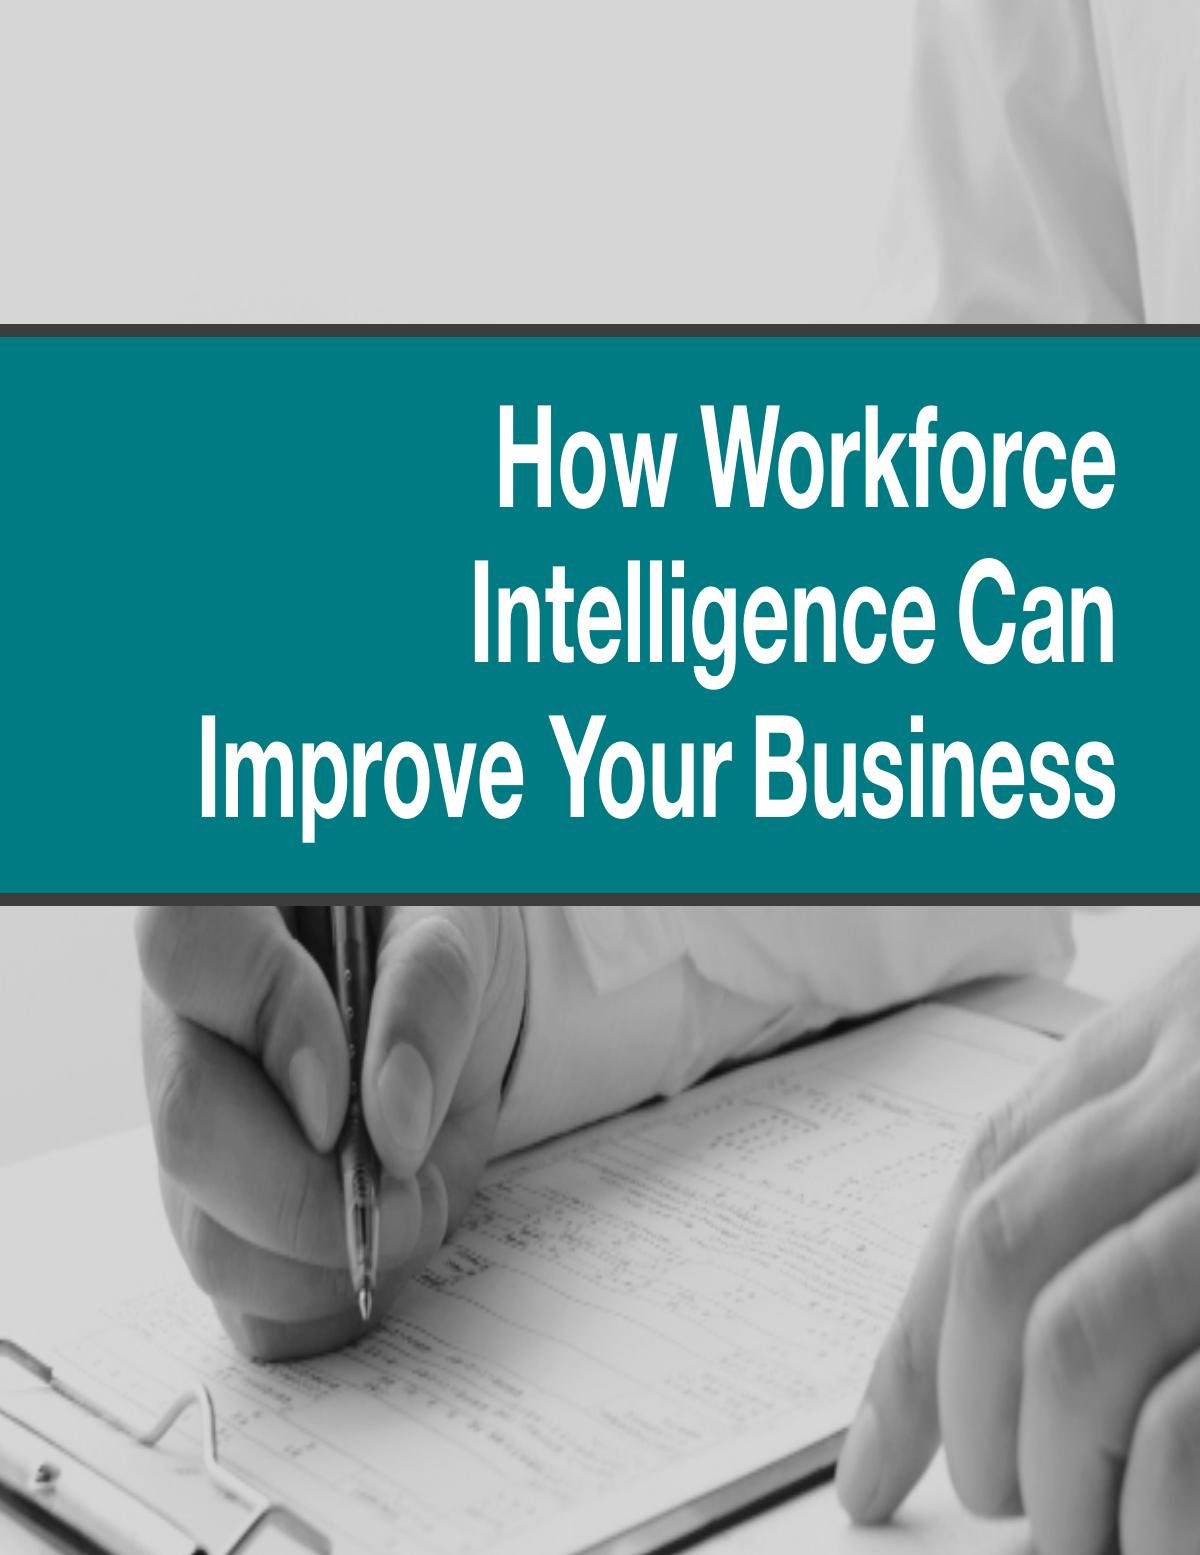 How Workforce Intelligence Can Improve Your Business